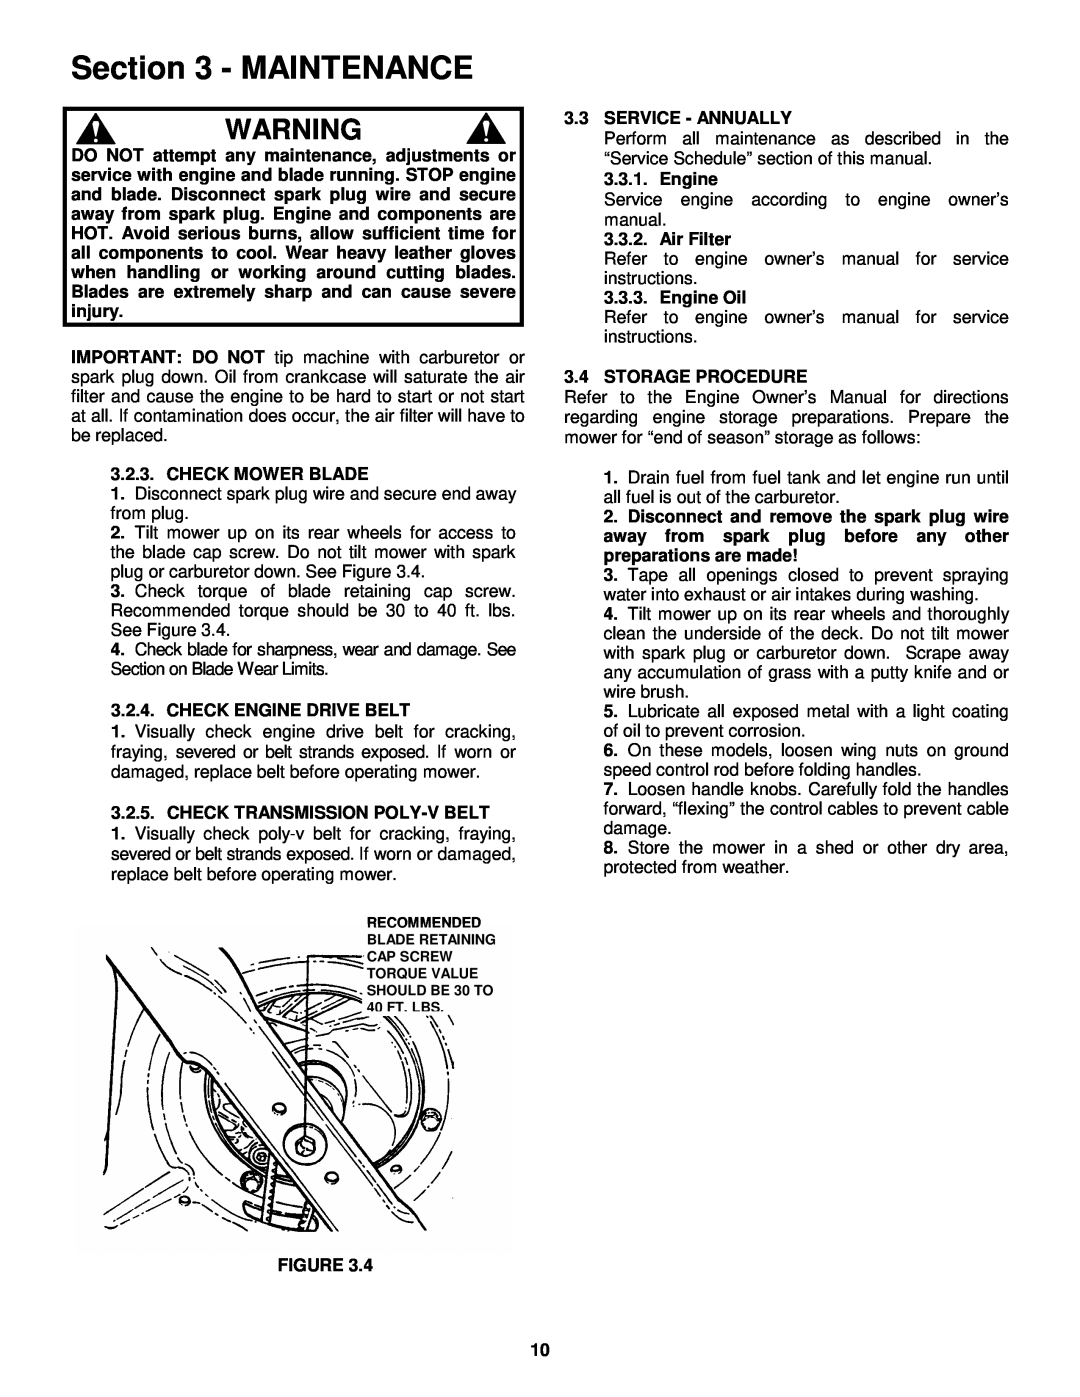 Snapper EFRP216516BV important safety instructions Maintenance, Check Mower Blade 